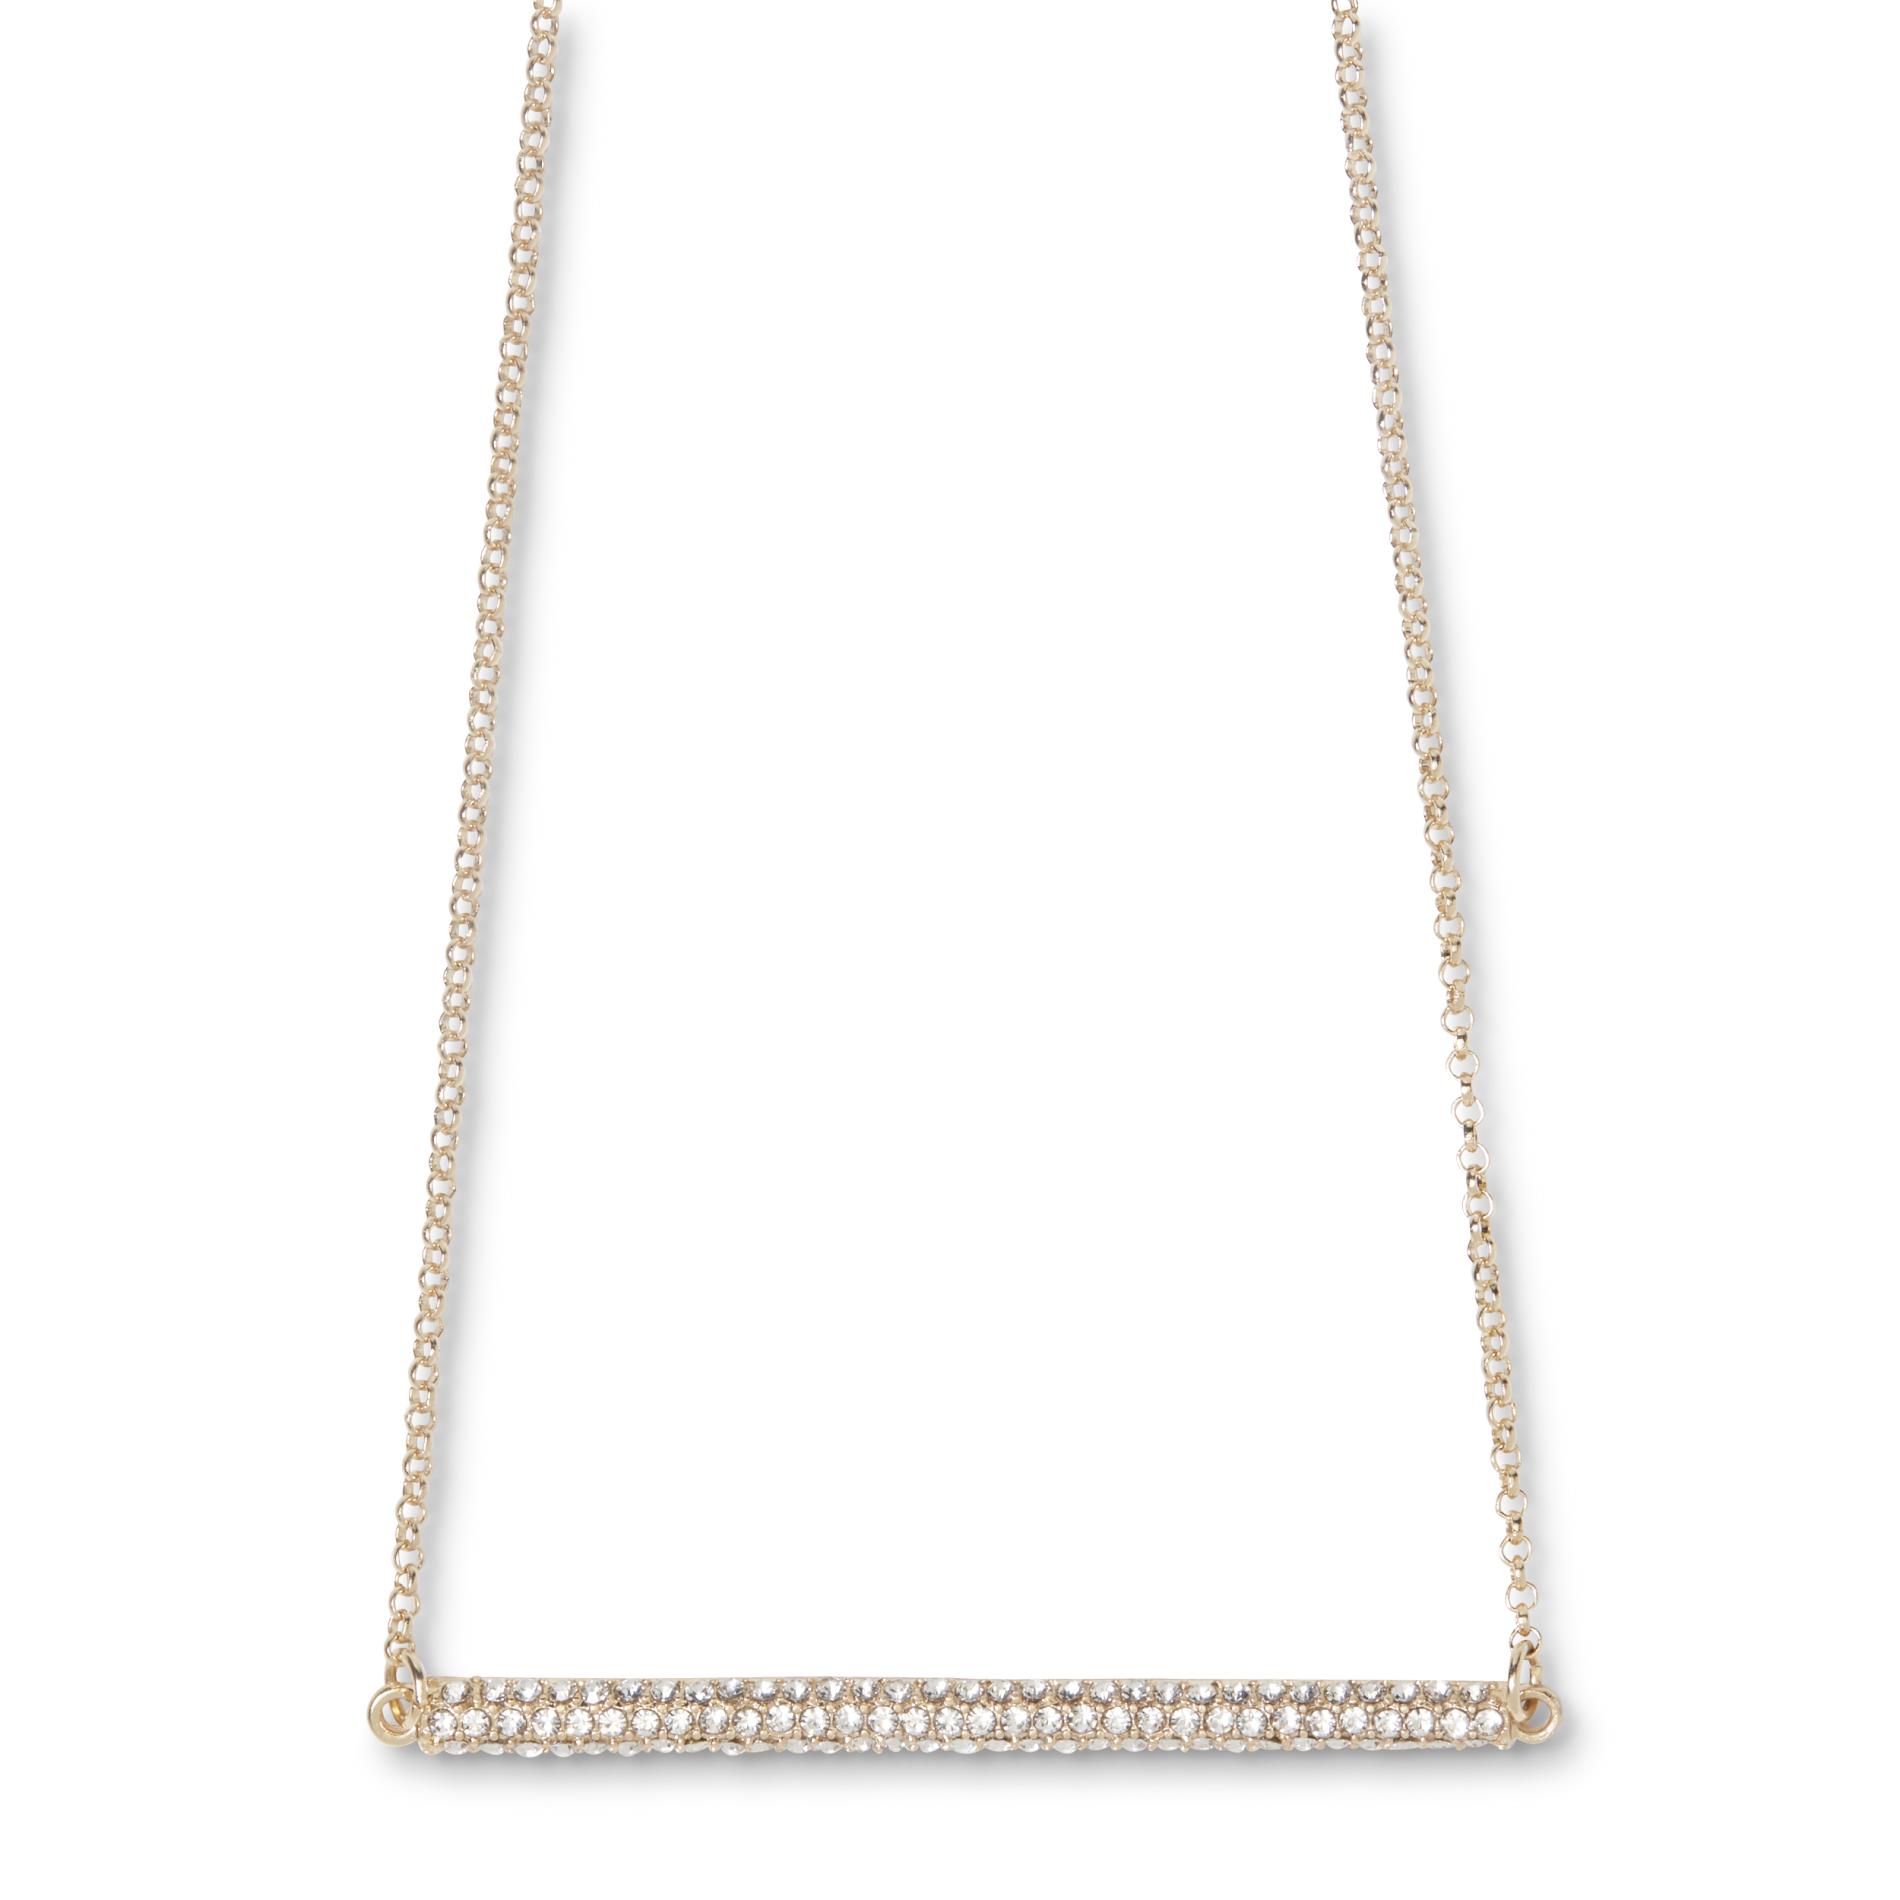 Attention Women's Goldtone Jeweled Bar Necklace